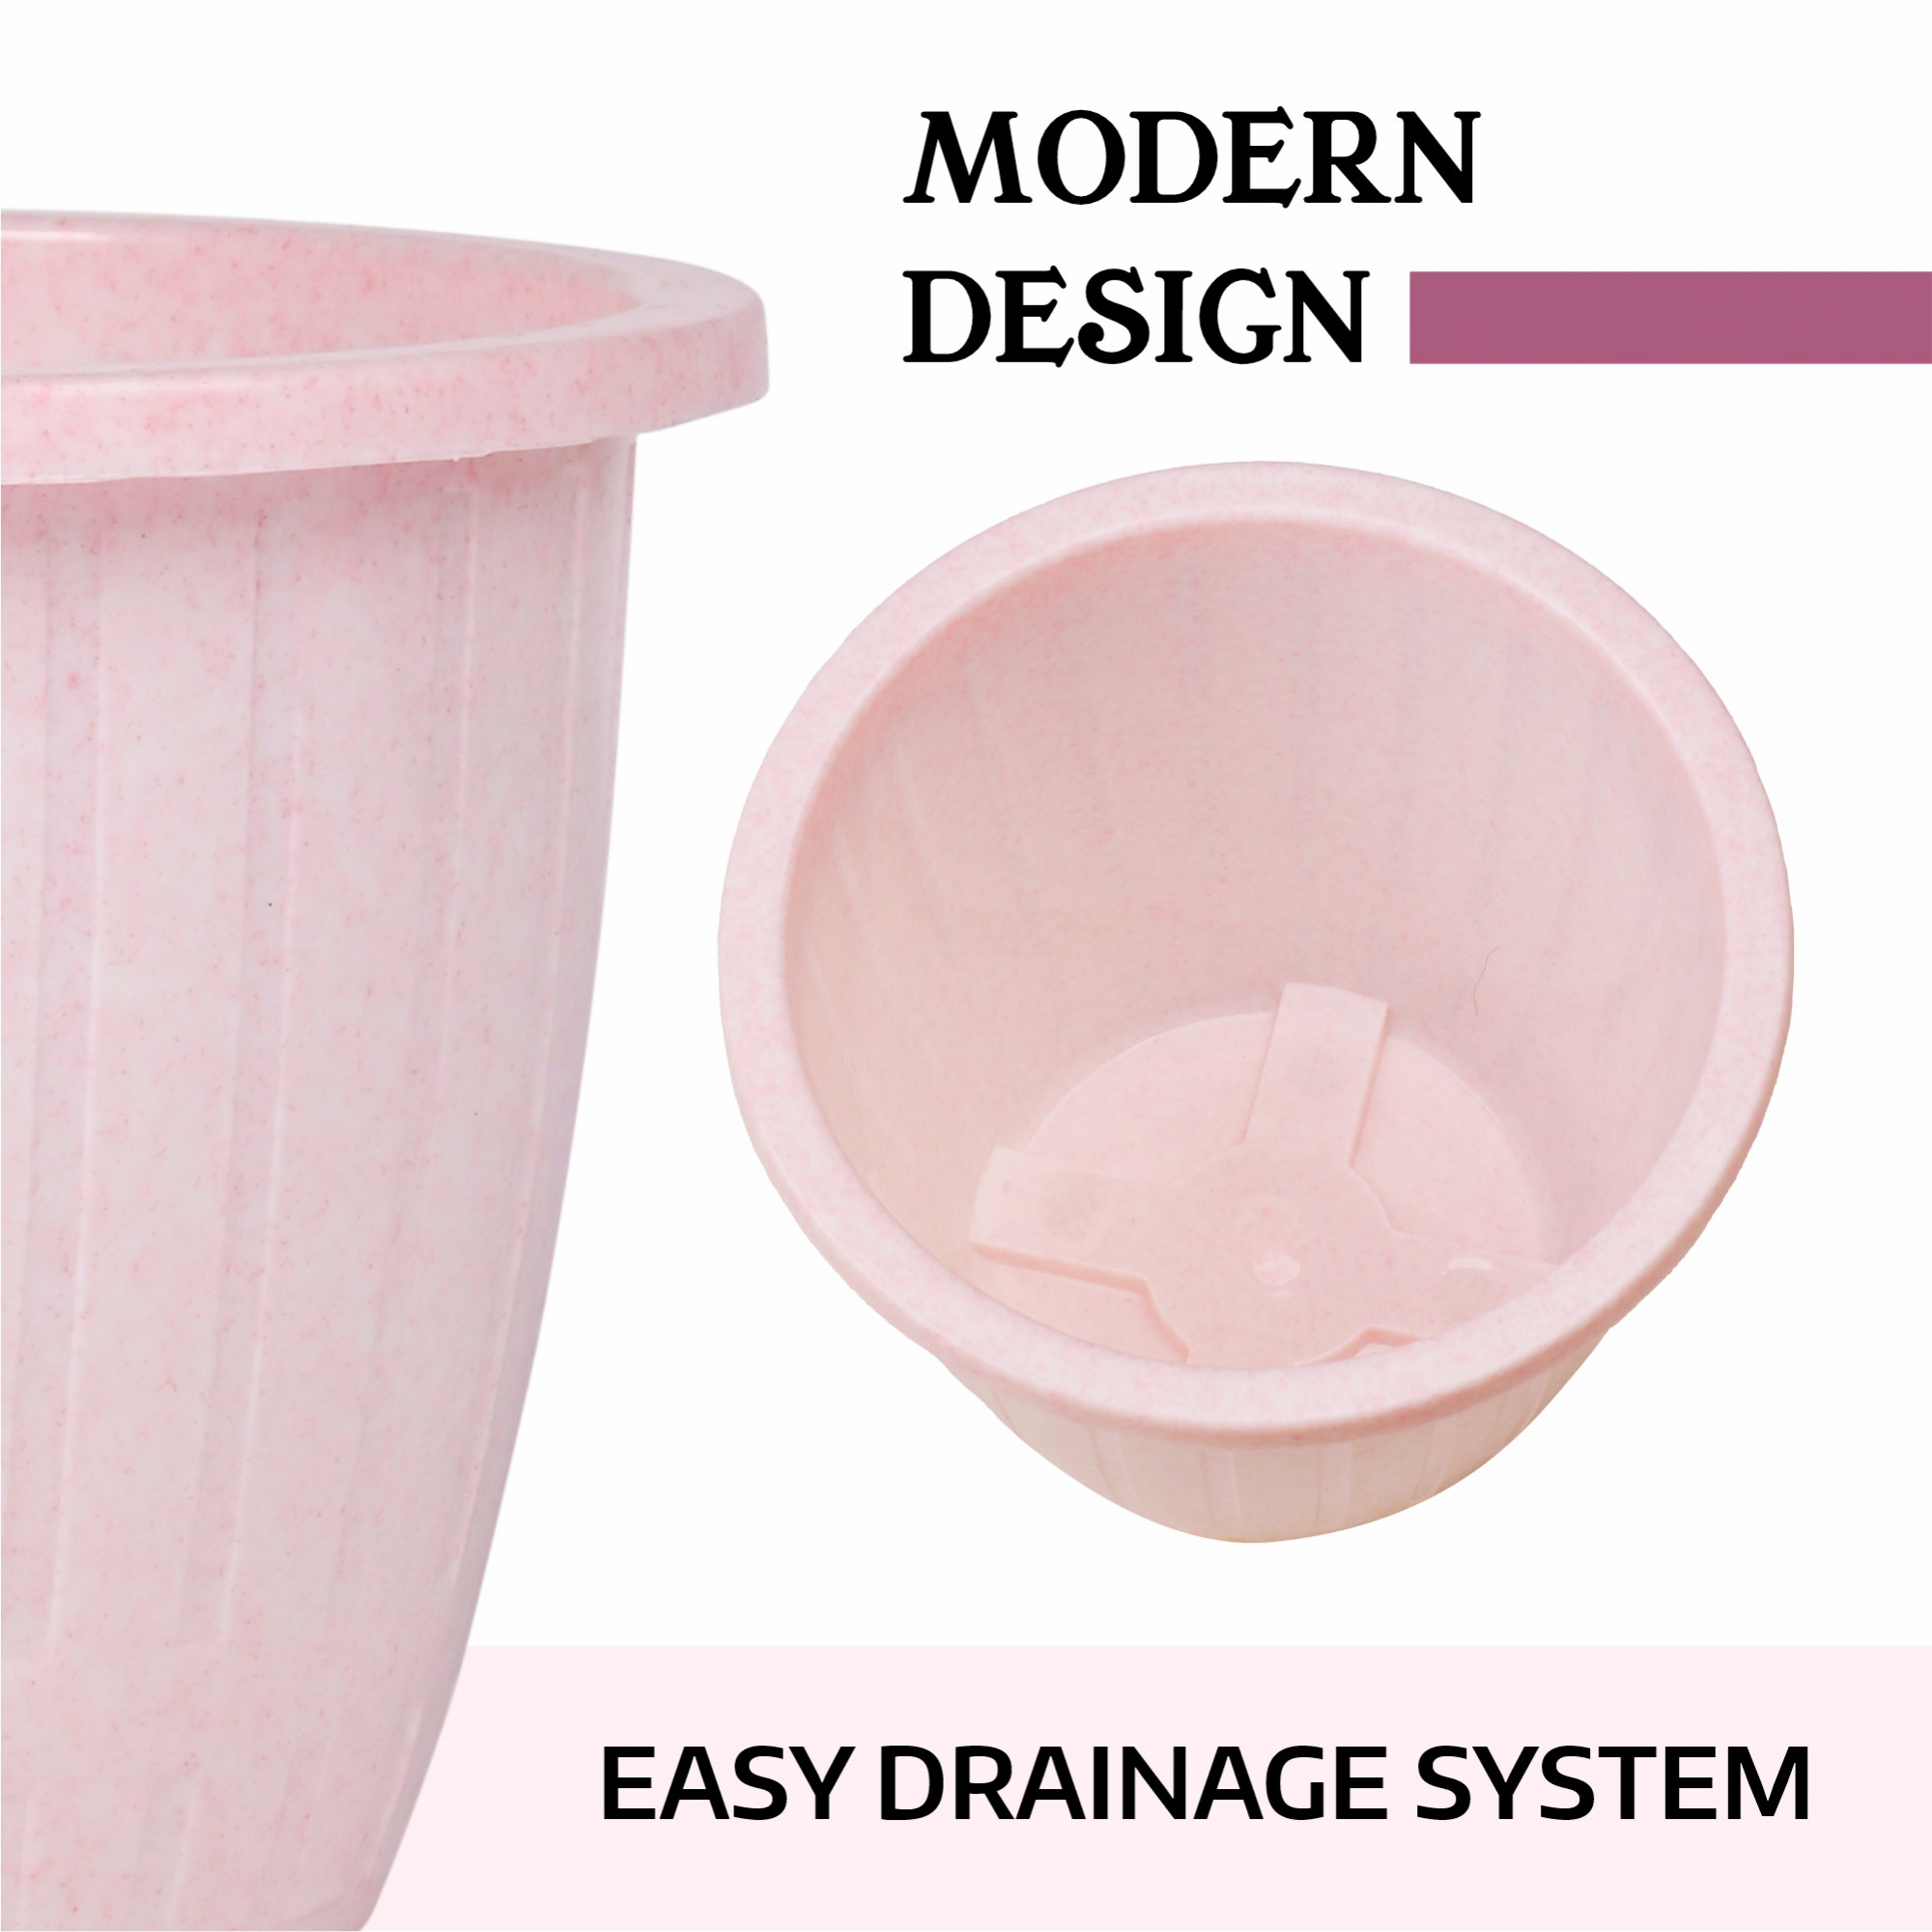 Kuber Industries Flower Pot | Flower Pot for Living Room | Flower Planters for Home-Lawns & Gardening | Window Planters | Flower Pots for Balcony | Marble Duro | 8 Inch | Pink